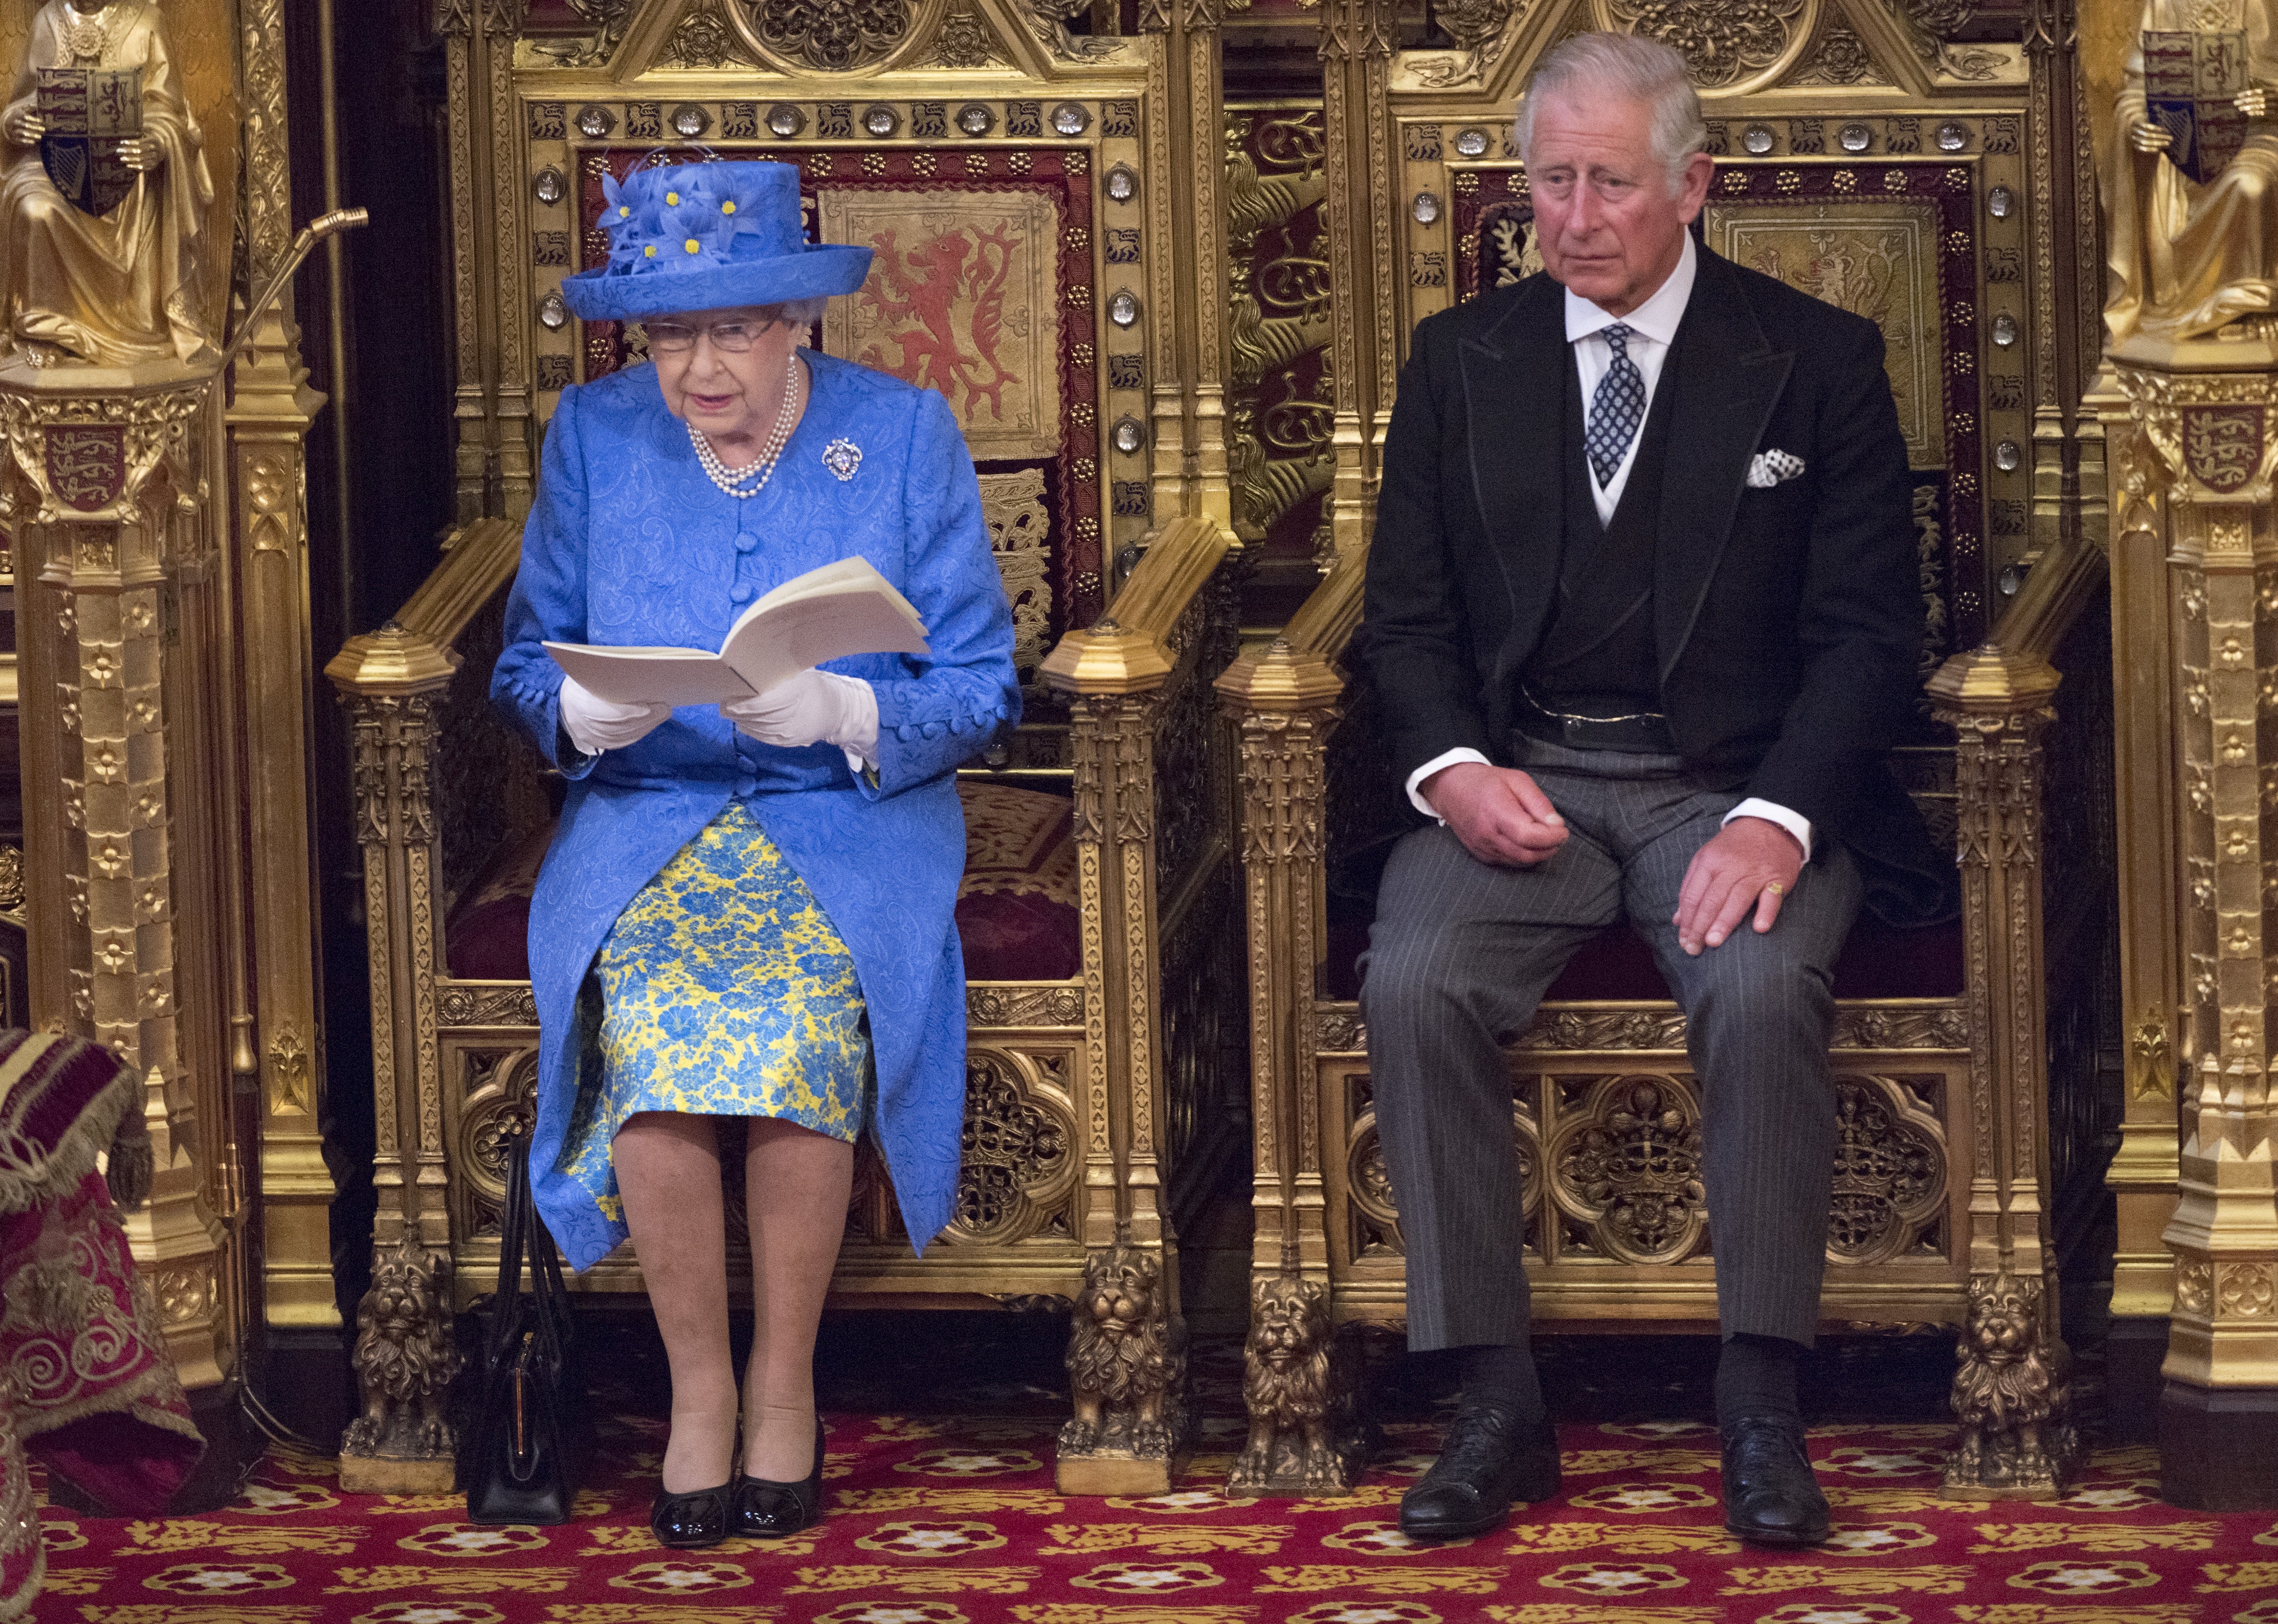 Queen Elizabeth II and the Prince of Wales – now King Charles III – in the House of Lords for the State Opening of Parliament in 2017 (Arthur Edwards/The Sun/PA)